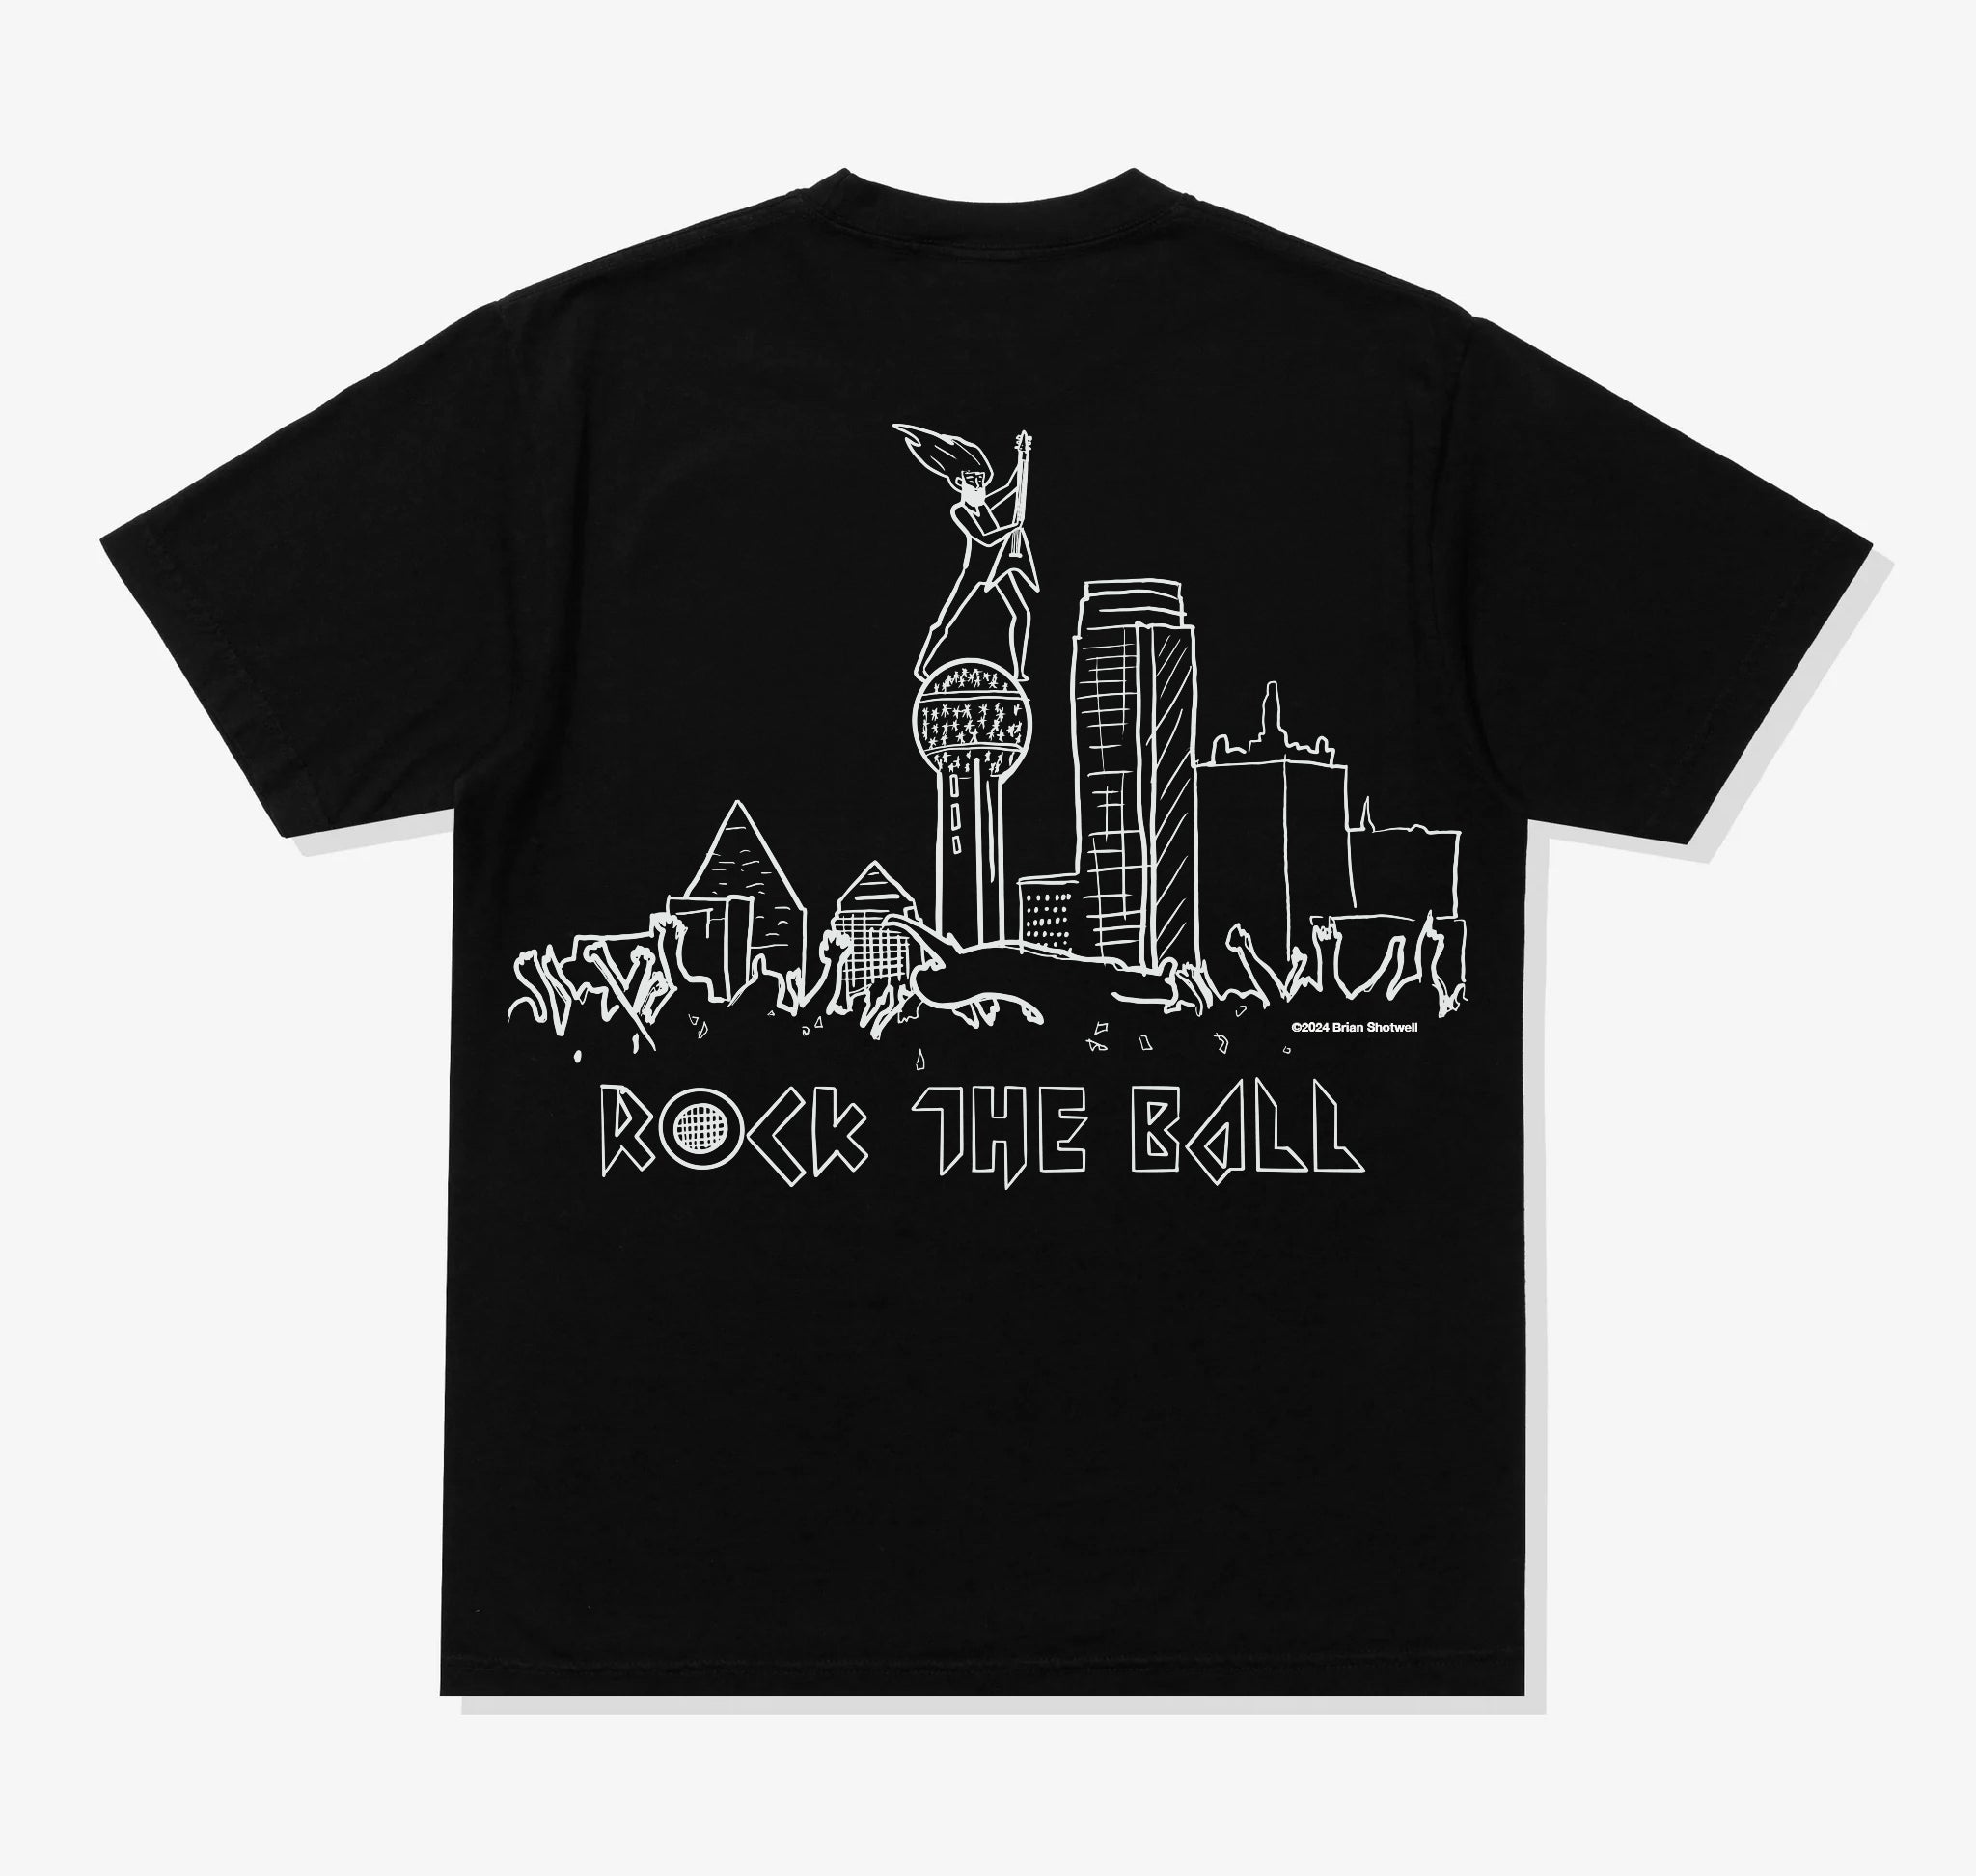 Brian Shotwell for BWoD 'City & County of Music' Tee